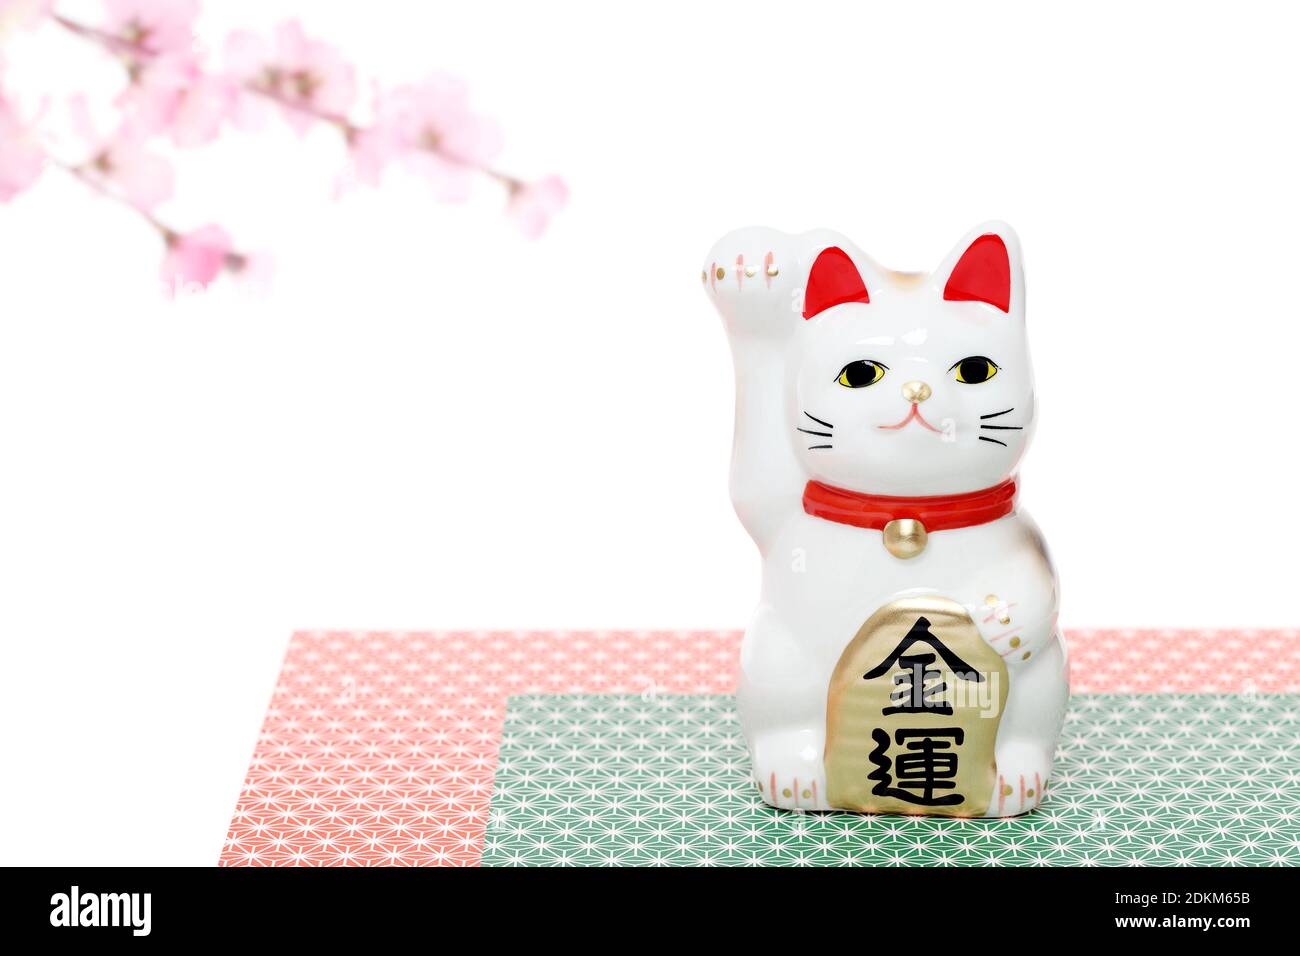 Maneki Neko lucky cat doll, Japanese word of this photography means 'economic fortune' Stock Photo